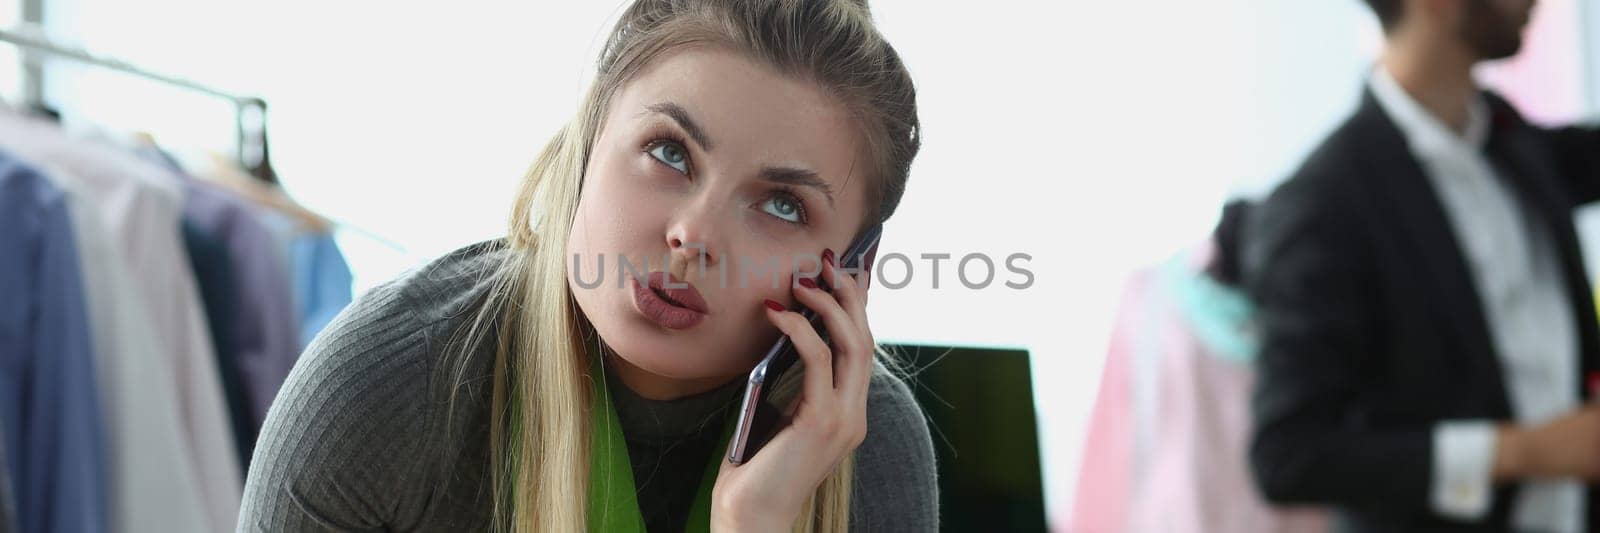 Creative designer manager stylist offers tailoring design option over phone. Seamstress woman talking to client on smartphone